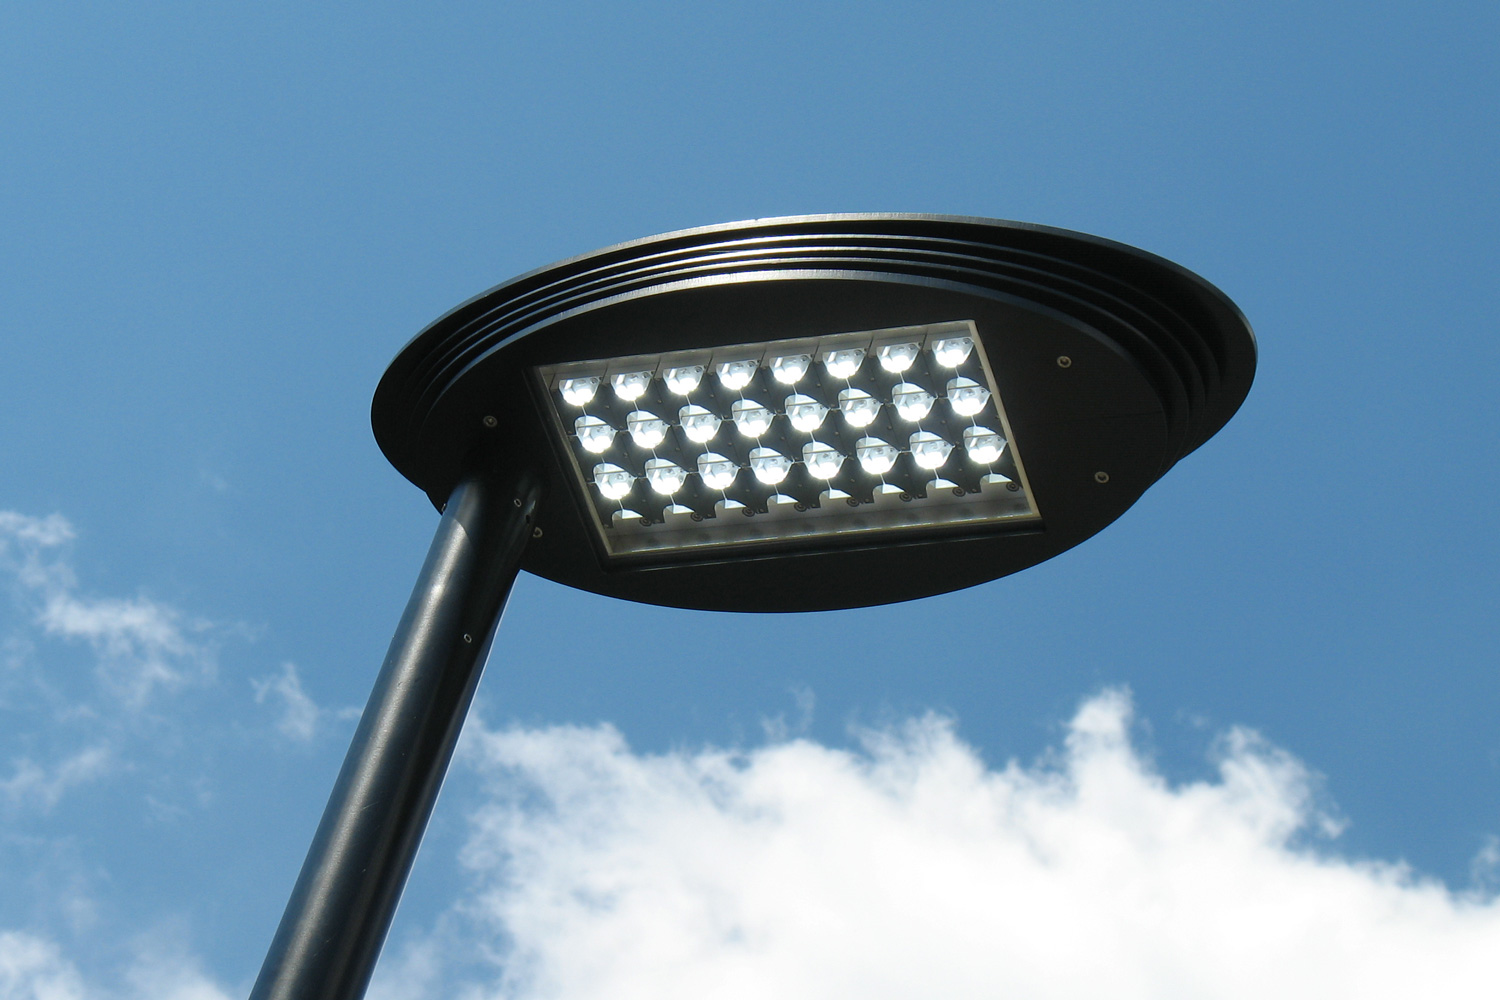 Head of a street light occupied by individual LED reflectors.